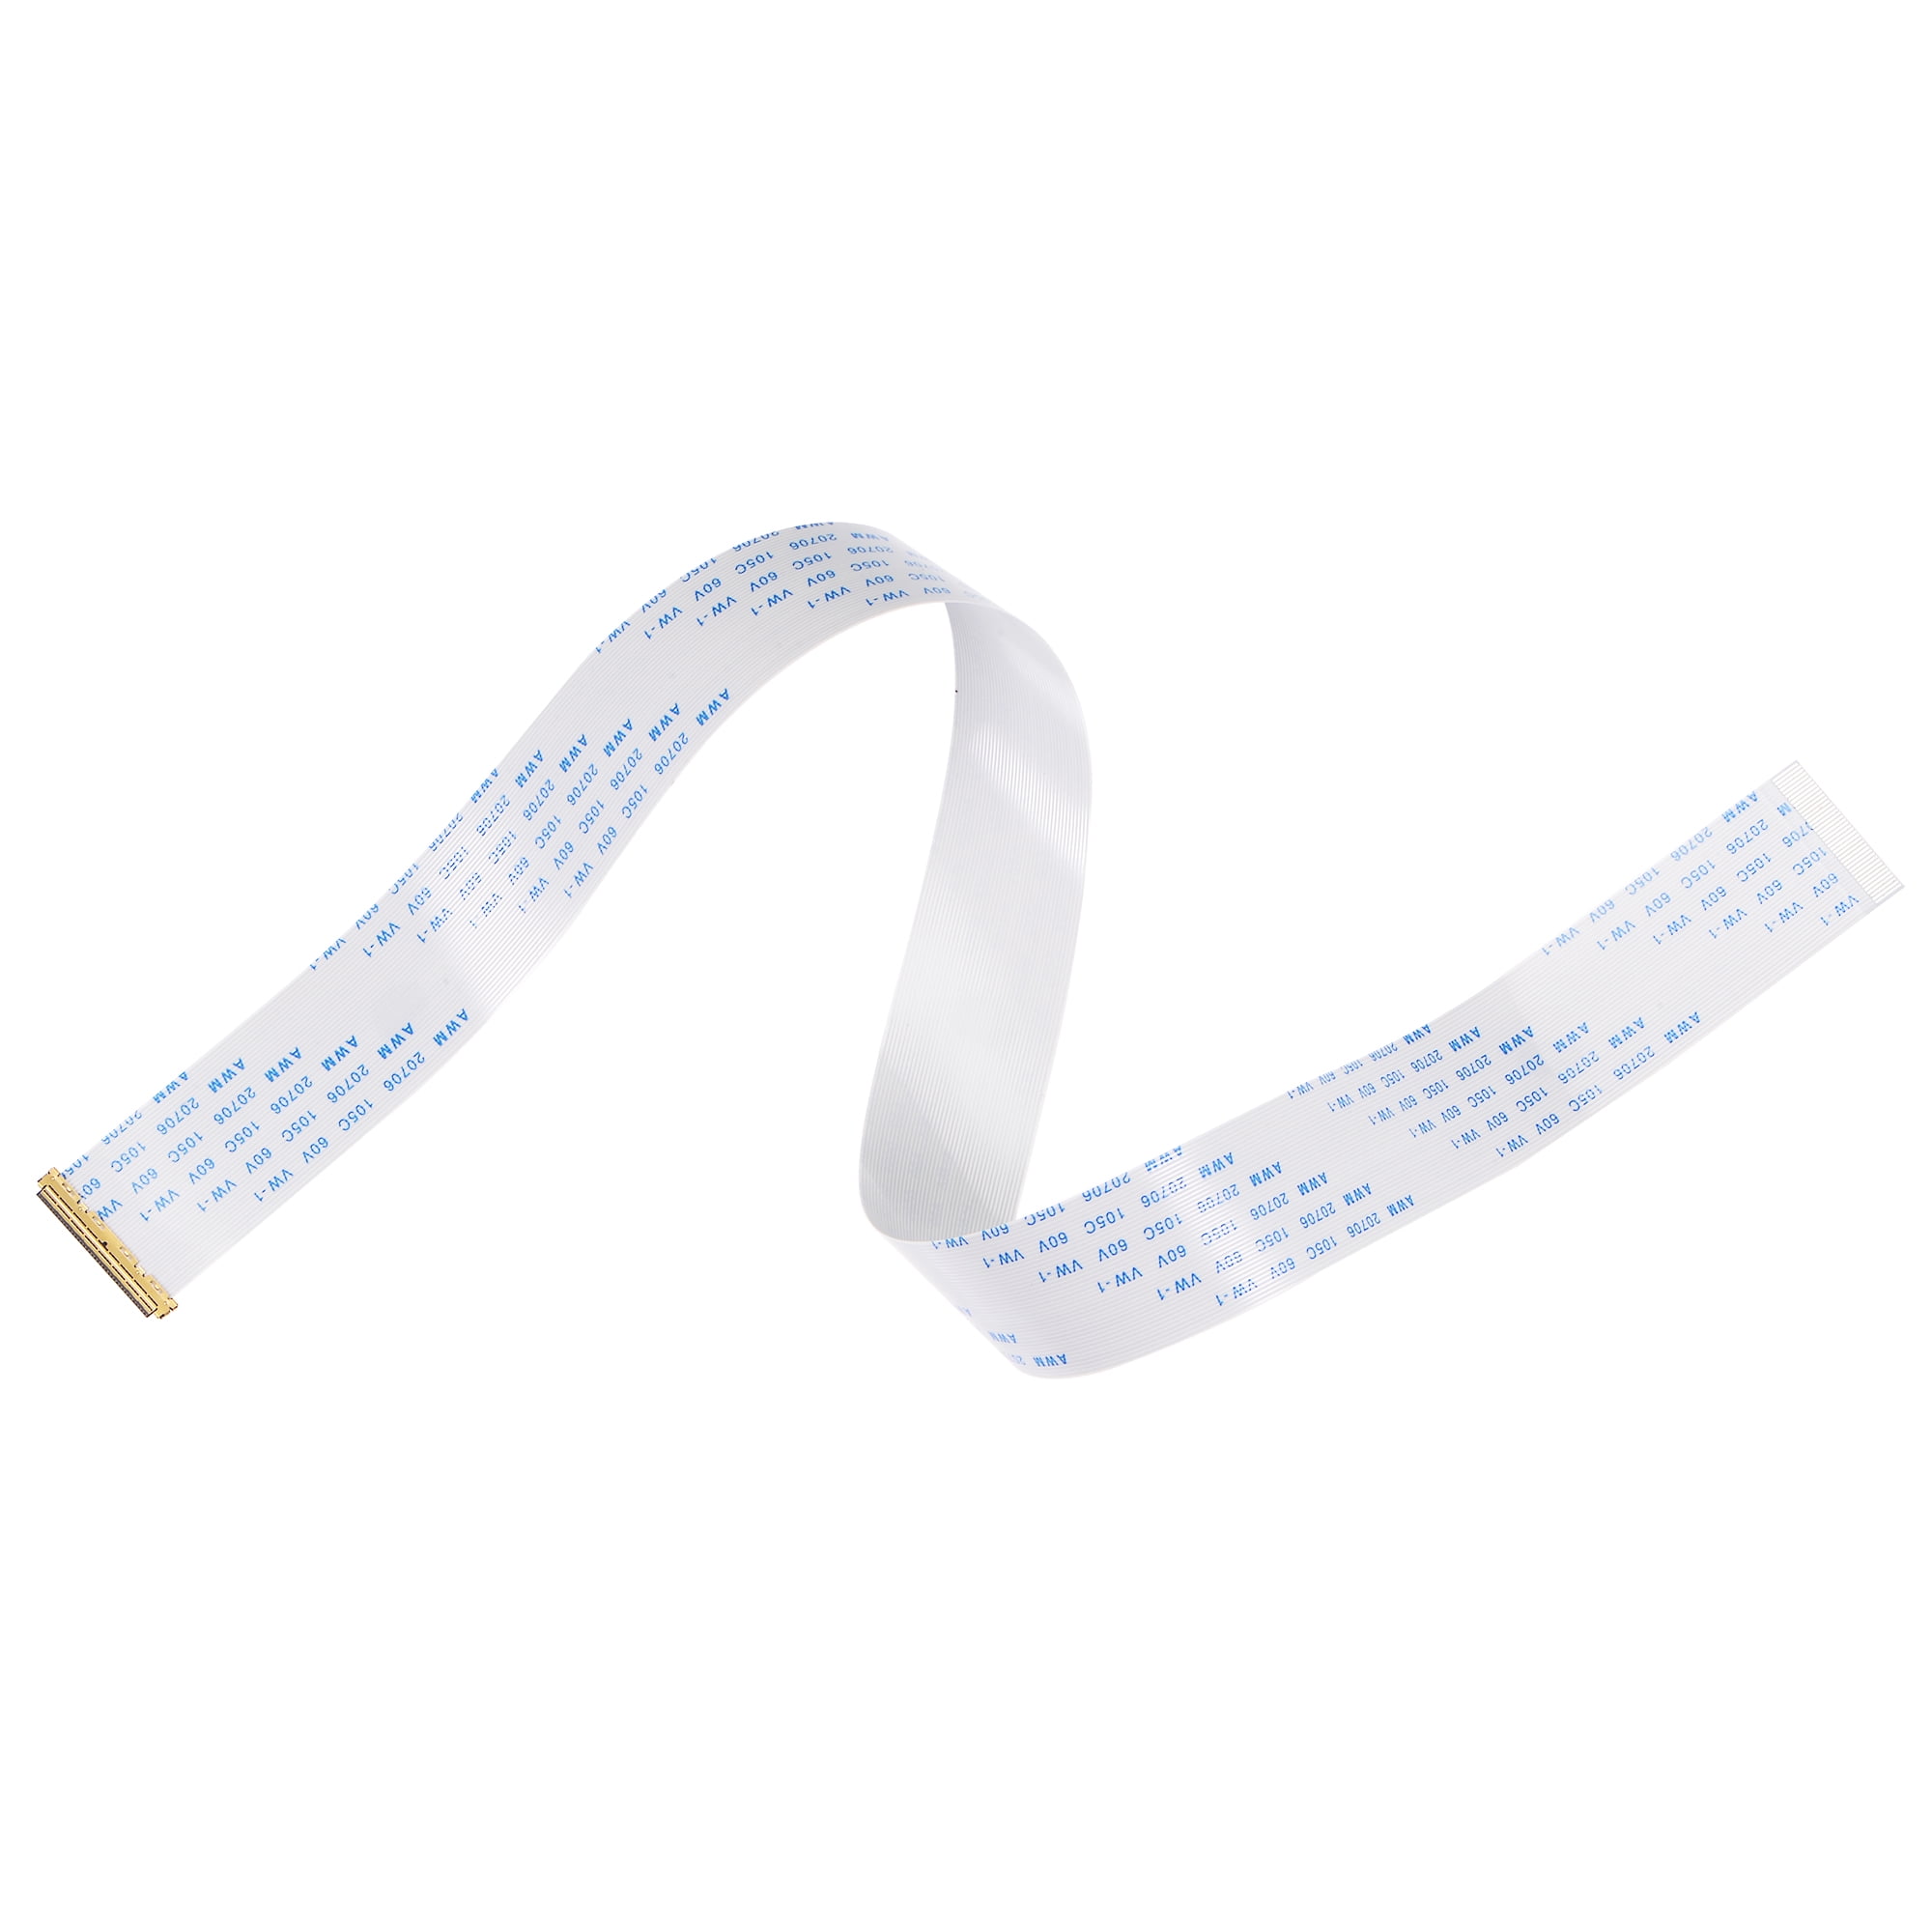 Cable Supplier Lvds Flat Ribbon Cable 40 Pin For Lcd Monitor - Buy Cable  Supplier Lvds Flat Ribbon Cable 40 Pin For Lcd Monitor Product on